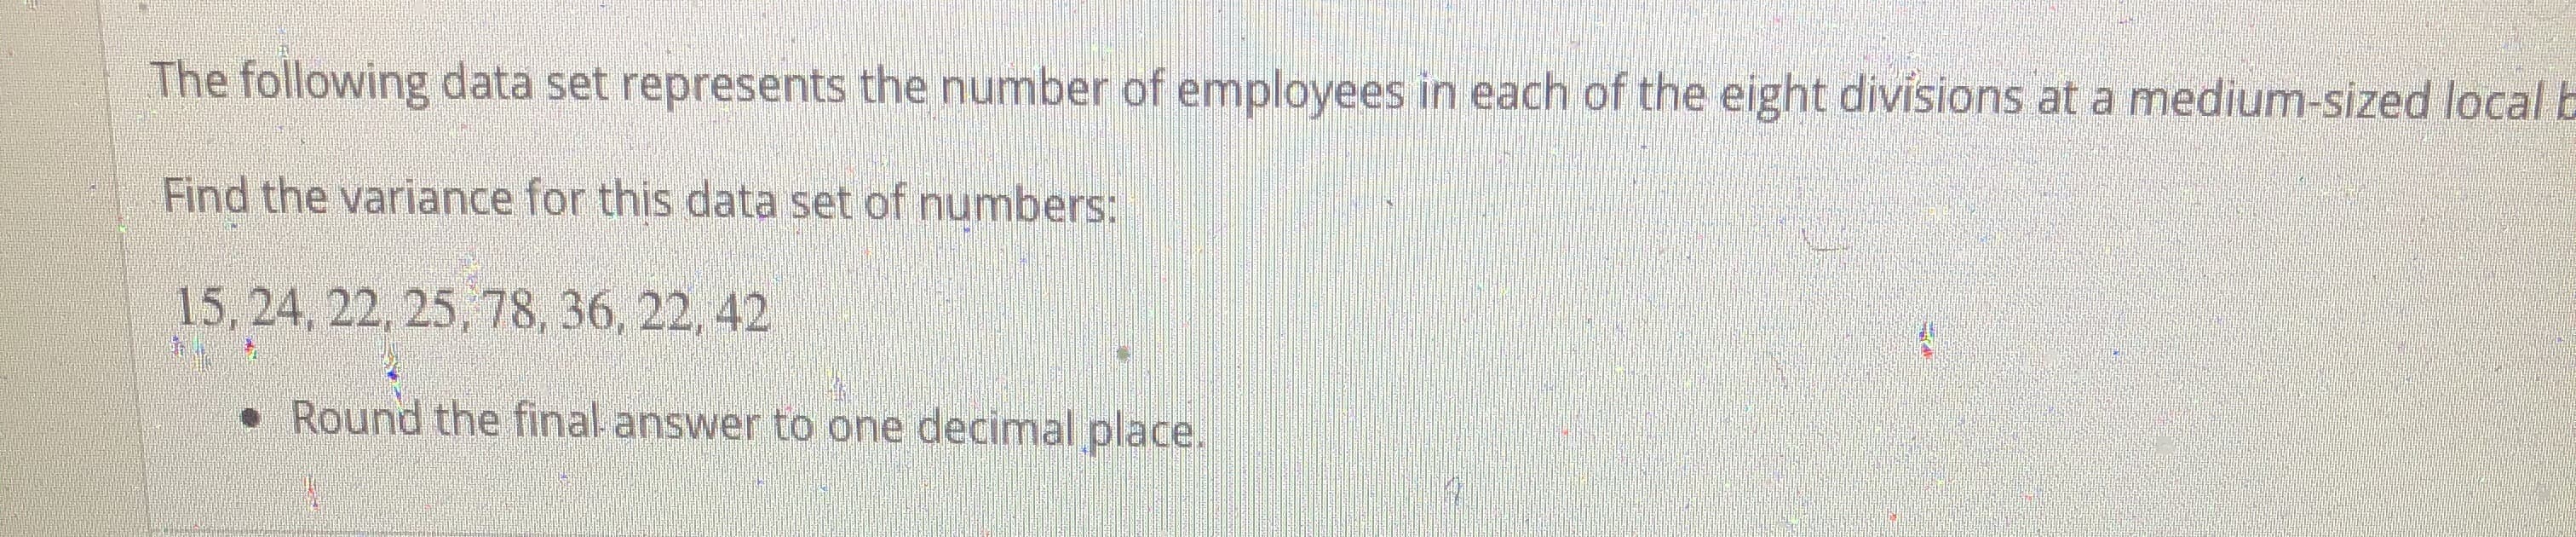 The following data set represents the number of employees in each of the eight divisions at a medium-sized local
Find the variance for this data set of numbers:
15, 24, 22, 25, 78, 36, 22, 42
• Round the final answer to one decimal place.
